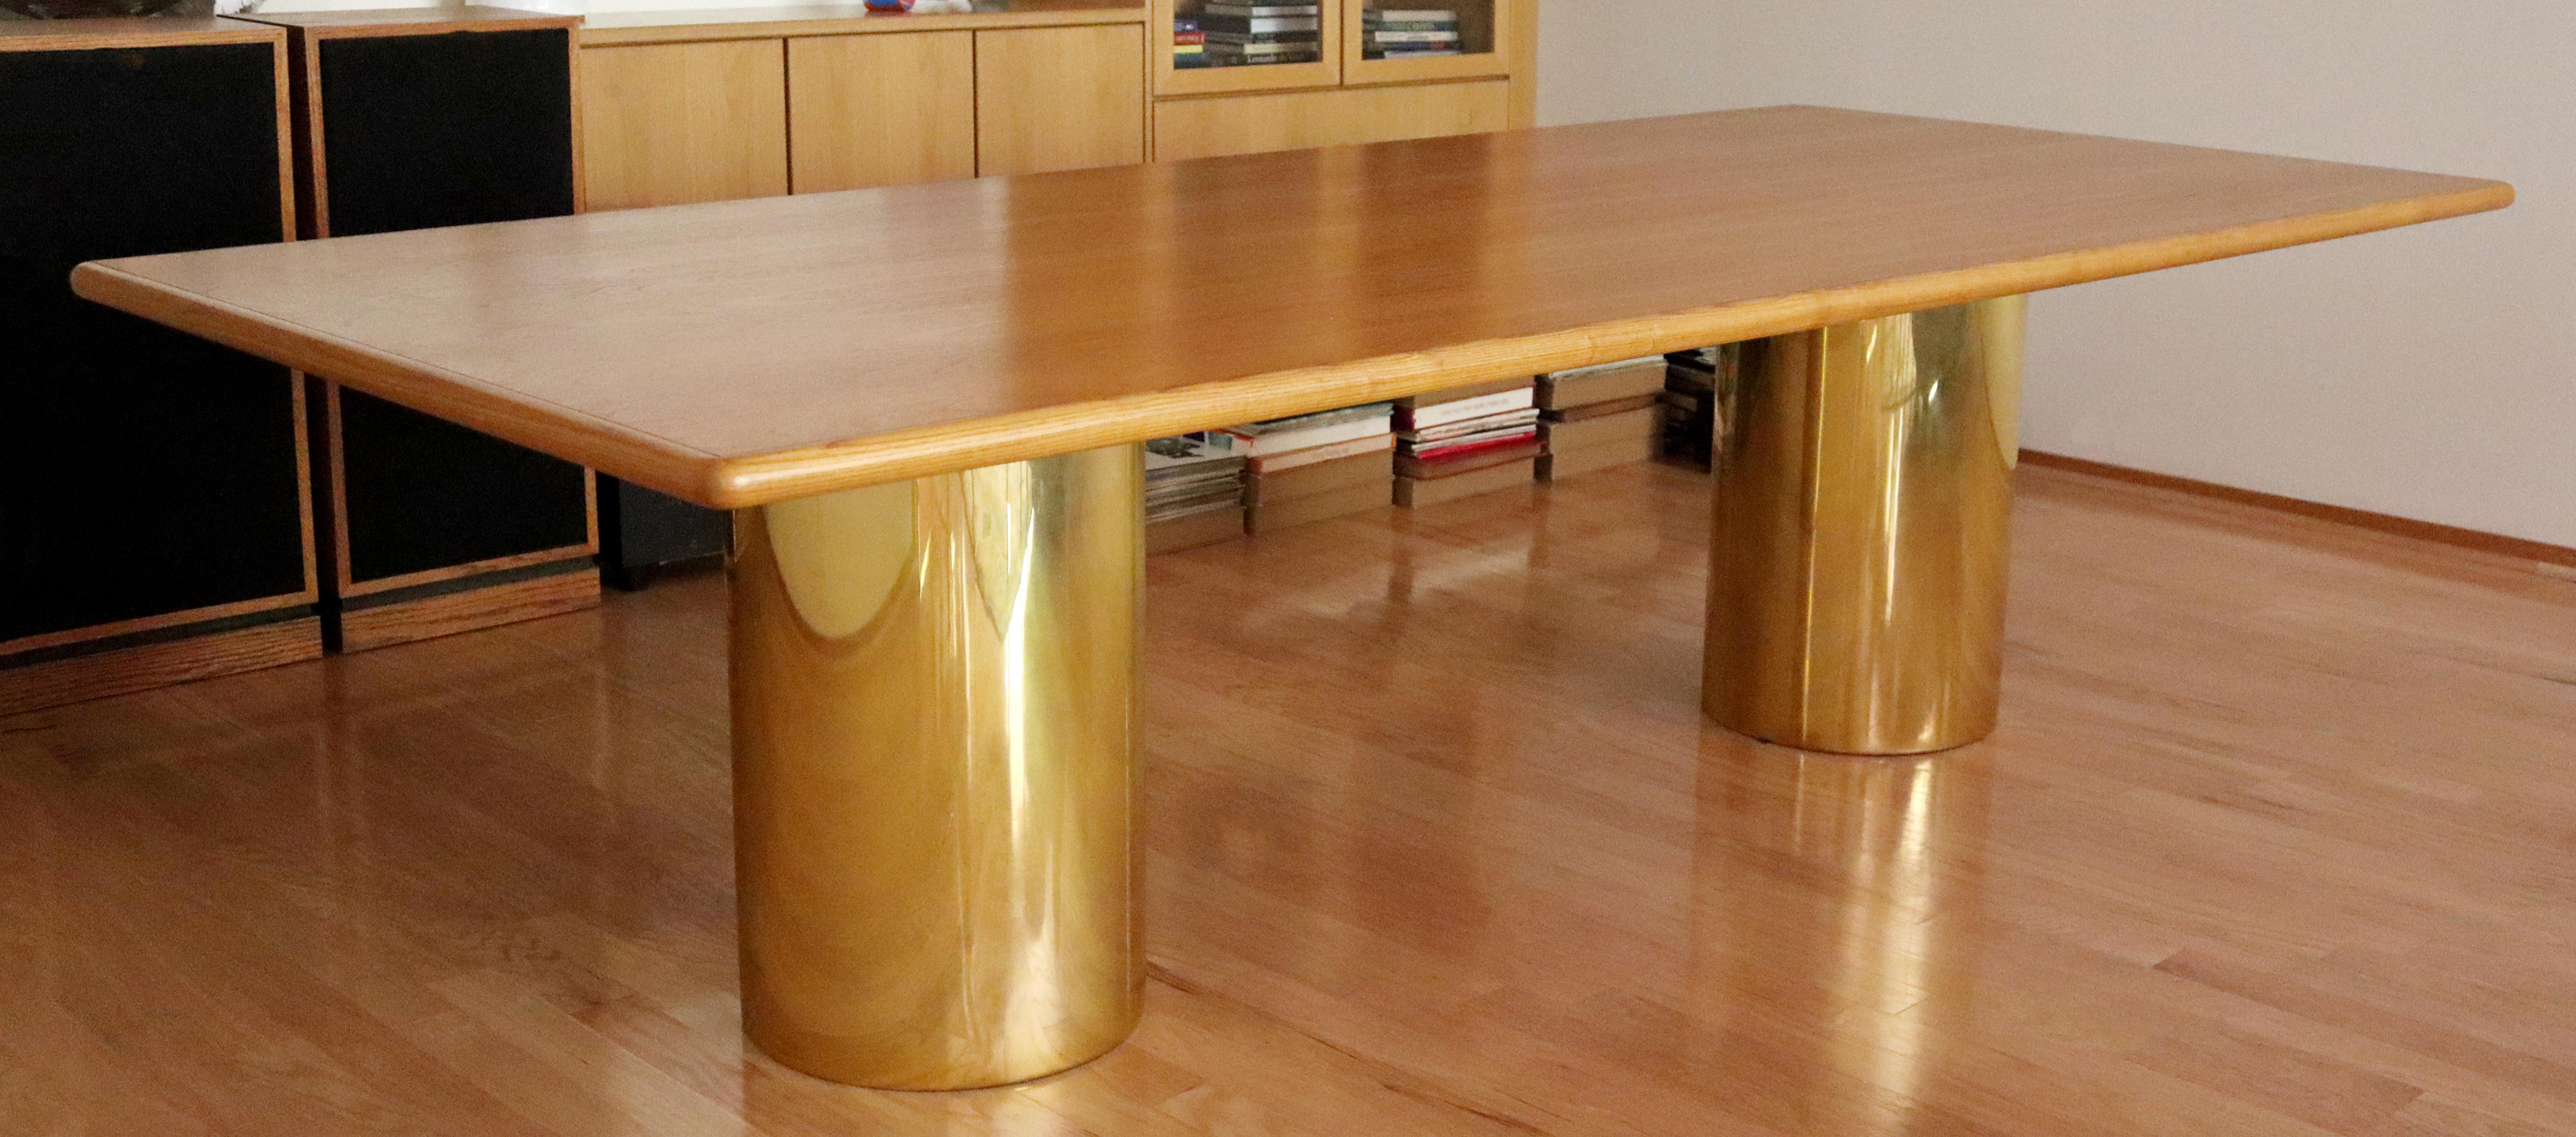 American Mid-Century Modern Maple & Brass Pedestal Dining Table by Intrex Breuton Style